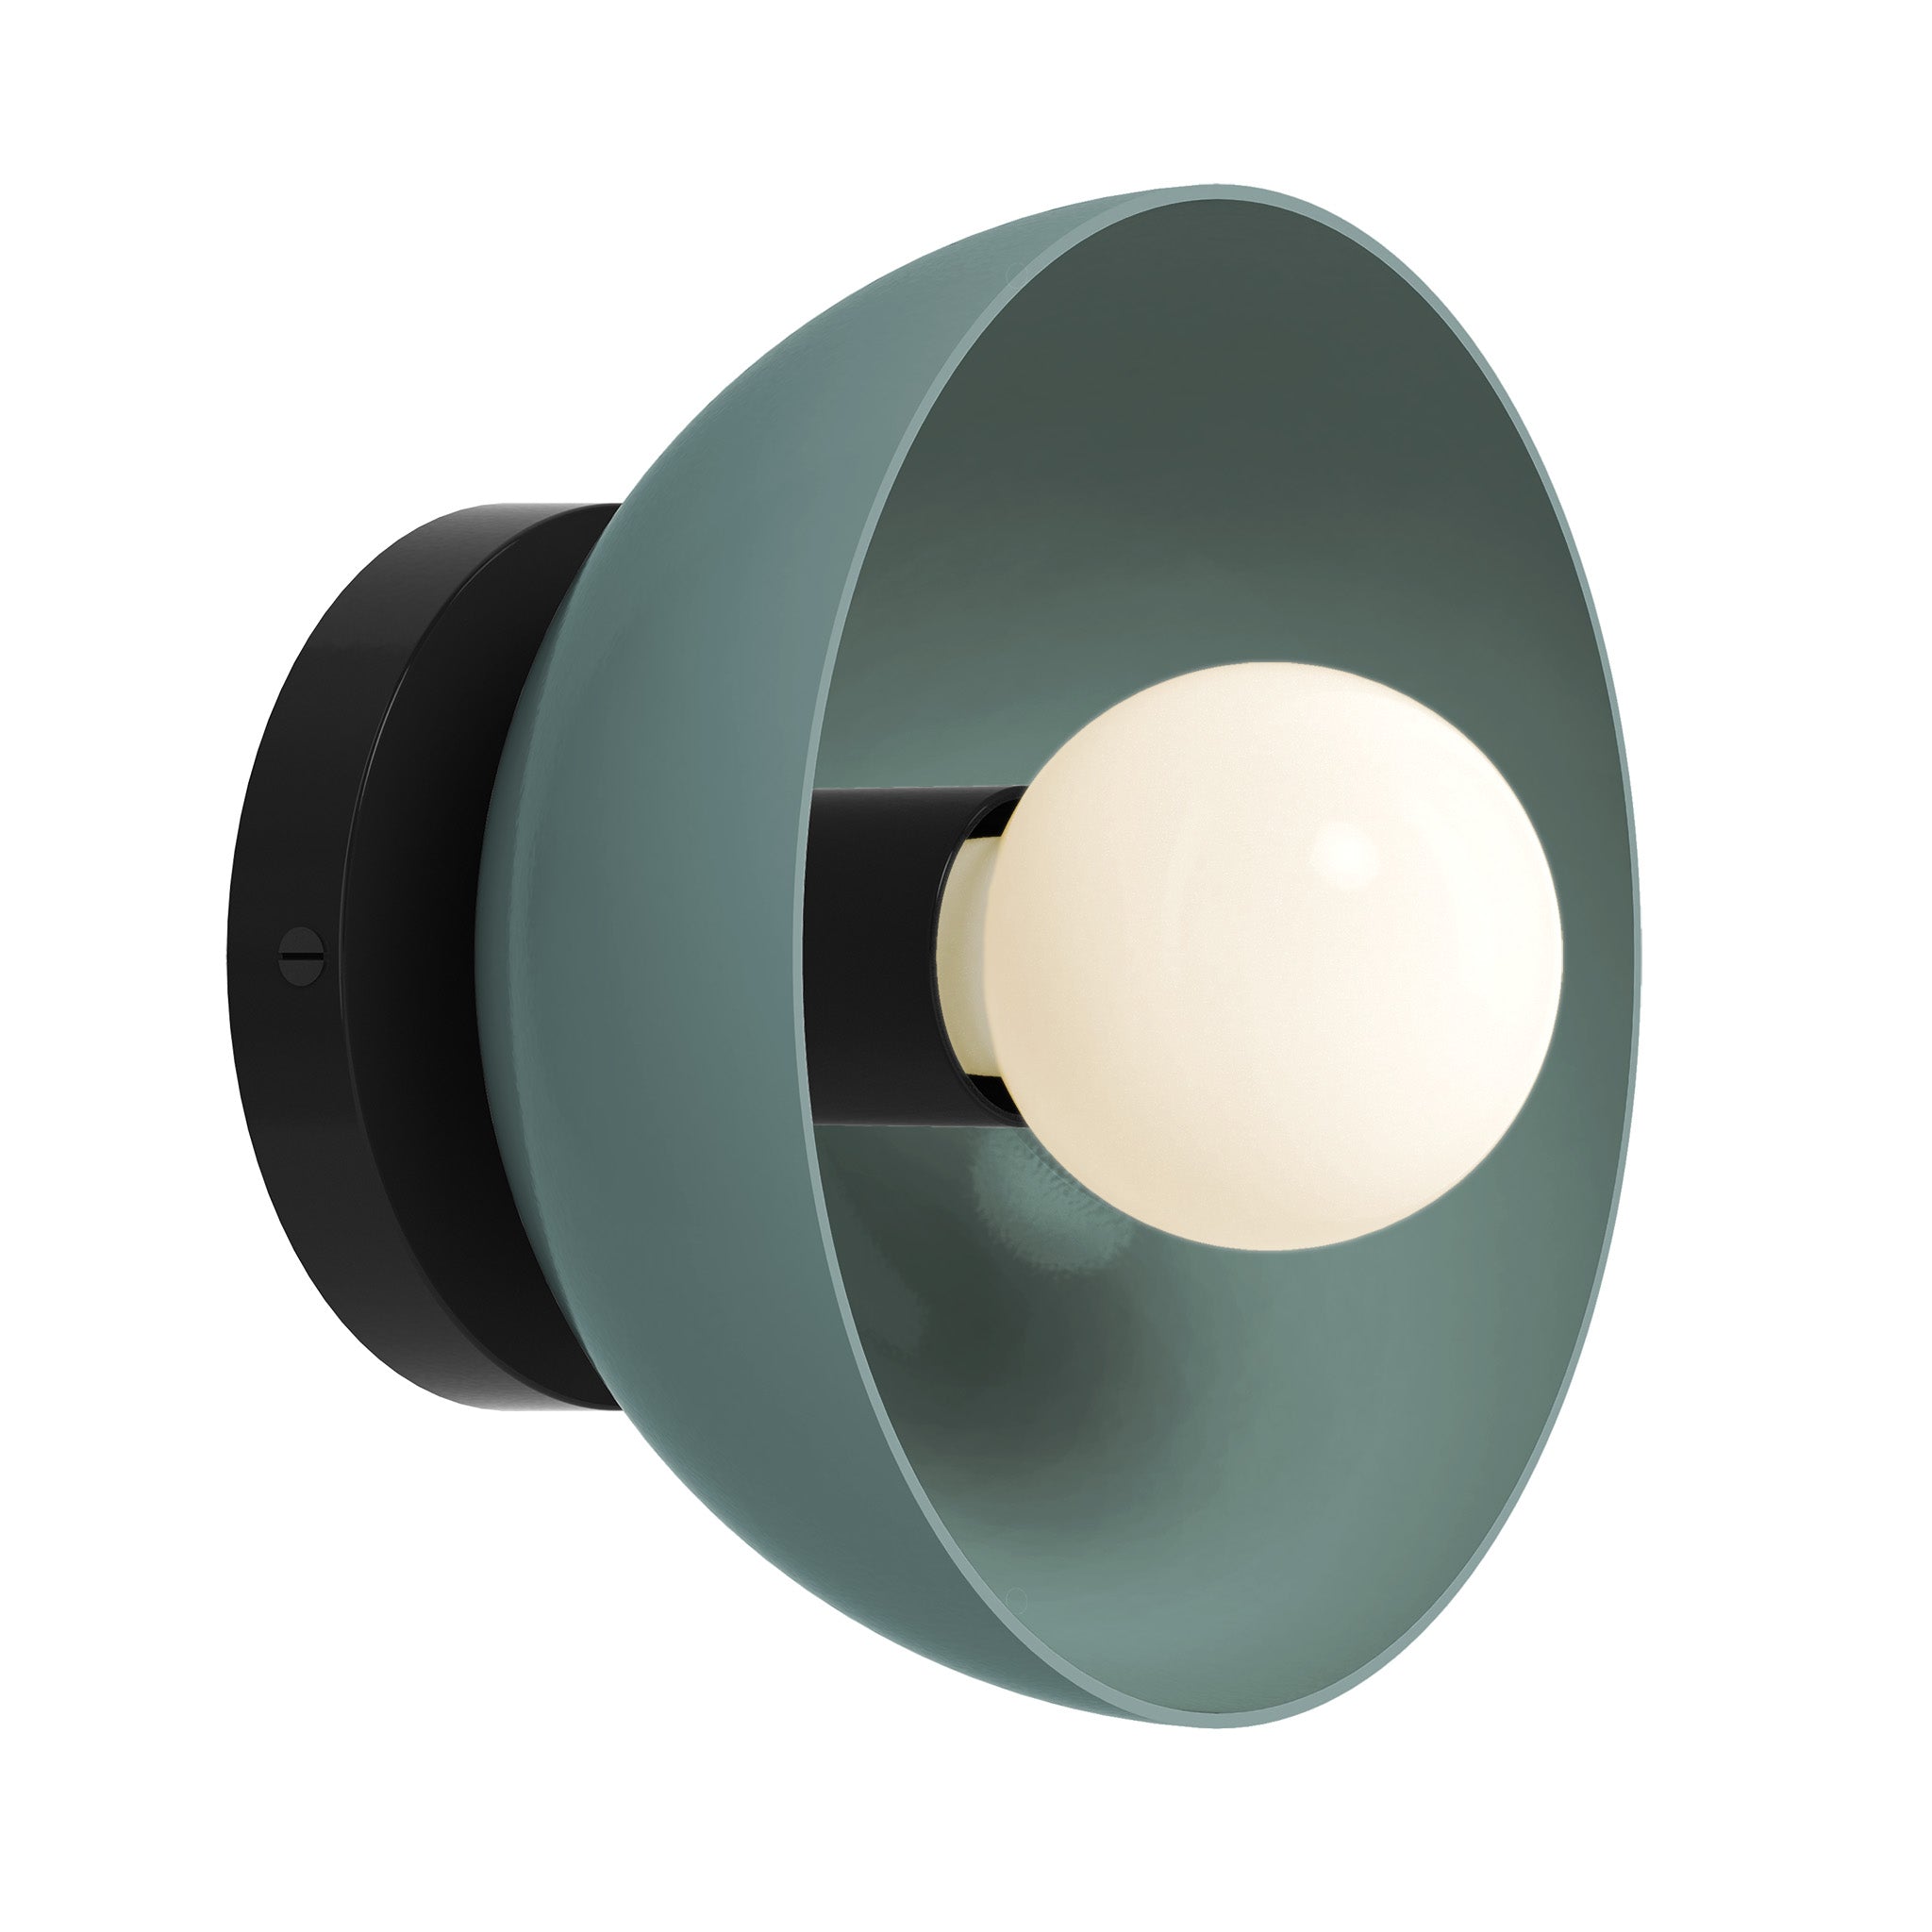 Black and lagoon color Hemi sconce 8" Dutton Brown lighting